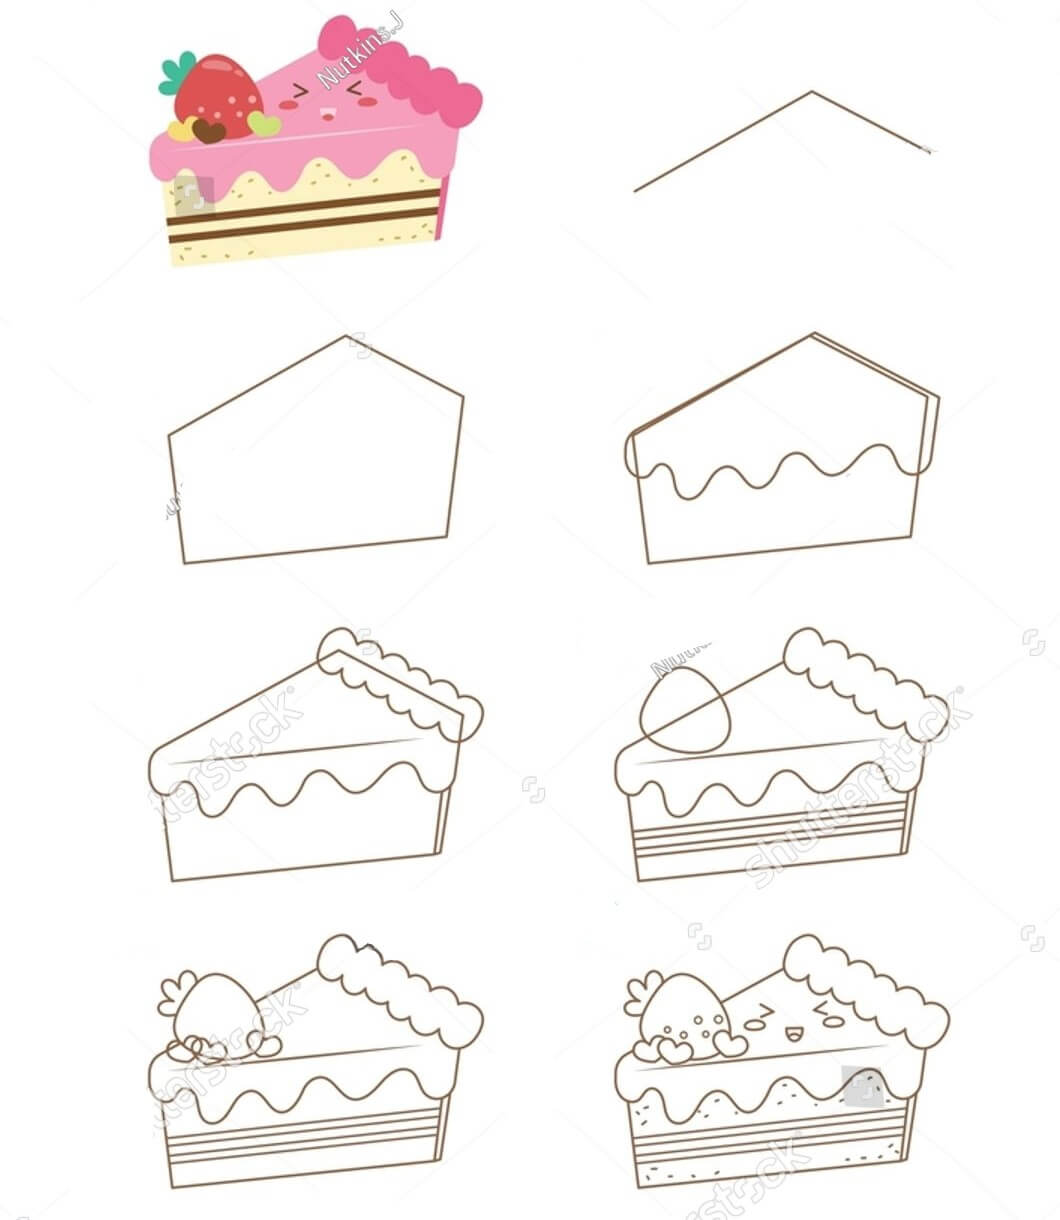 Simple cake drawing Drawing Ideas